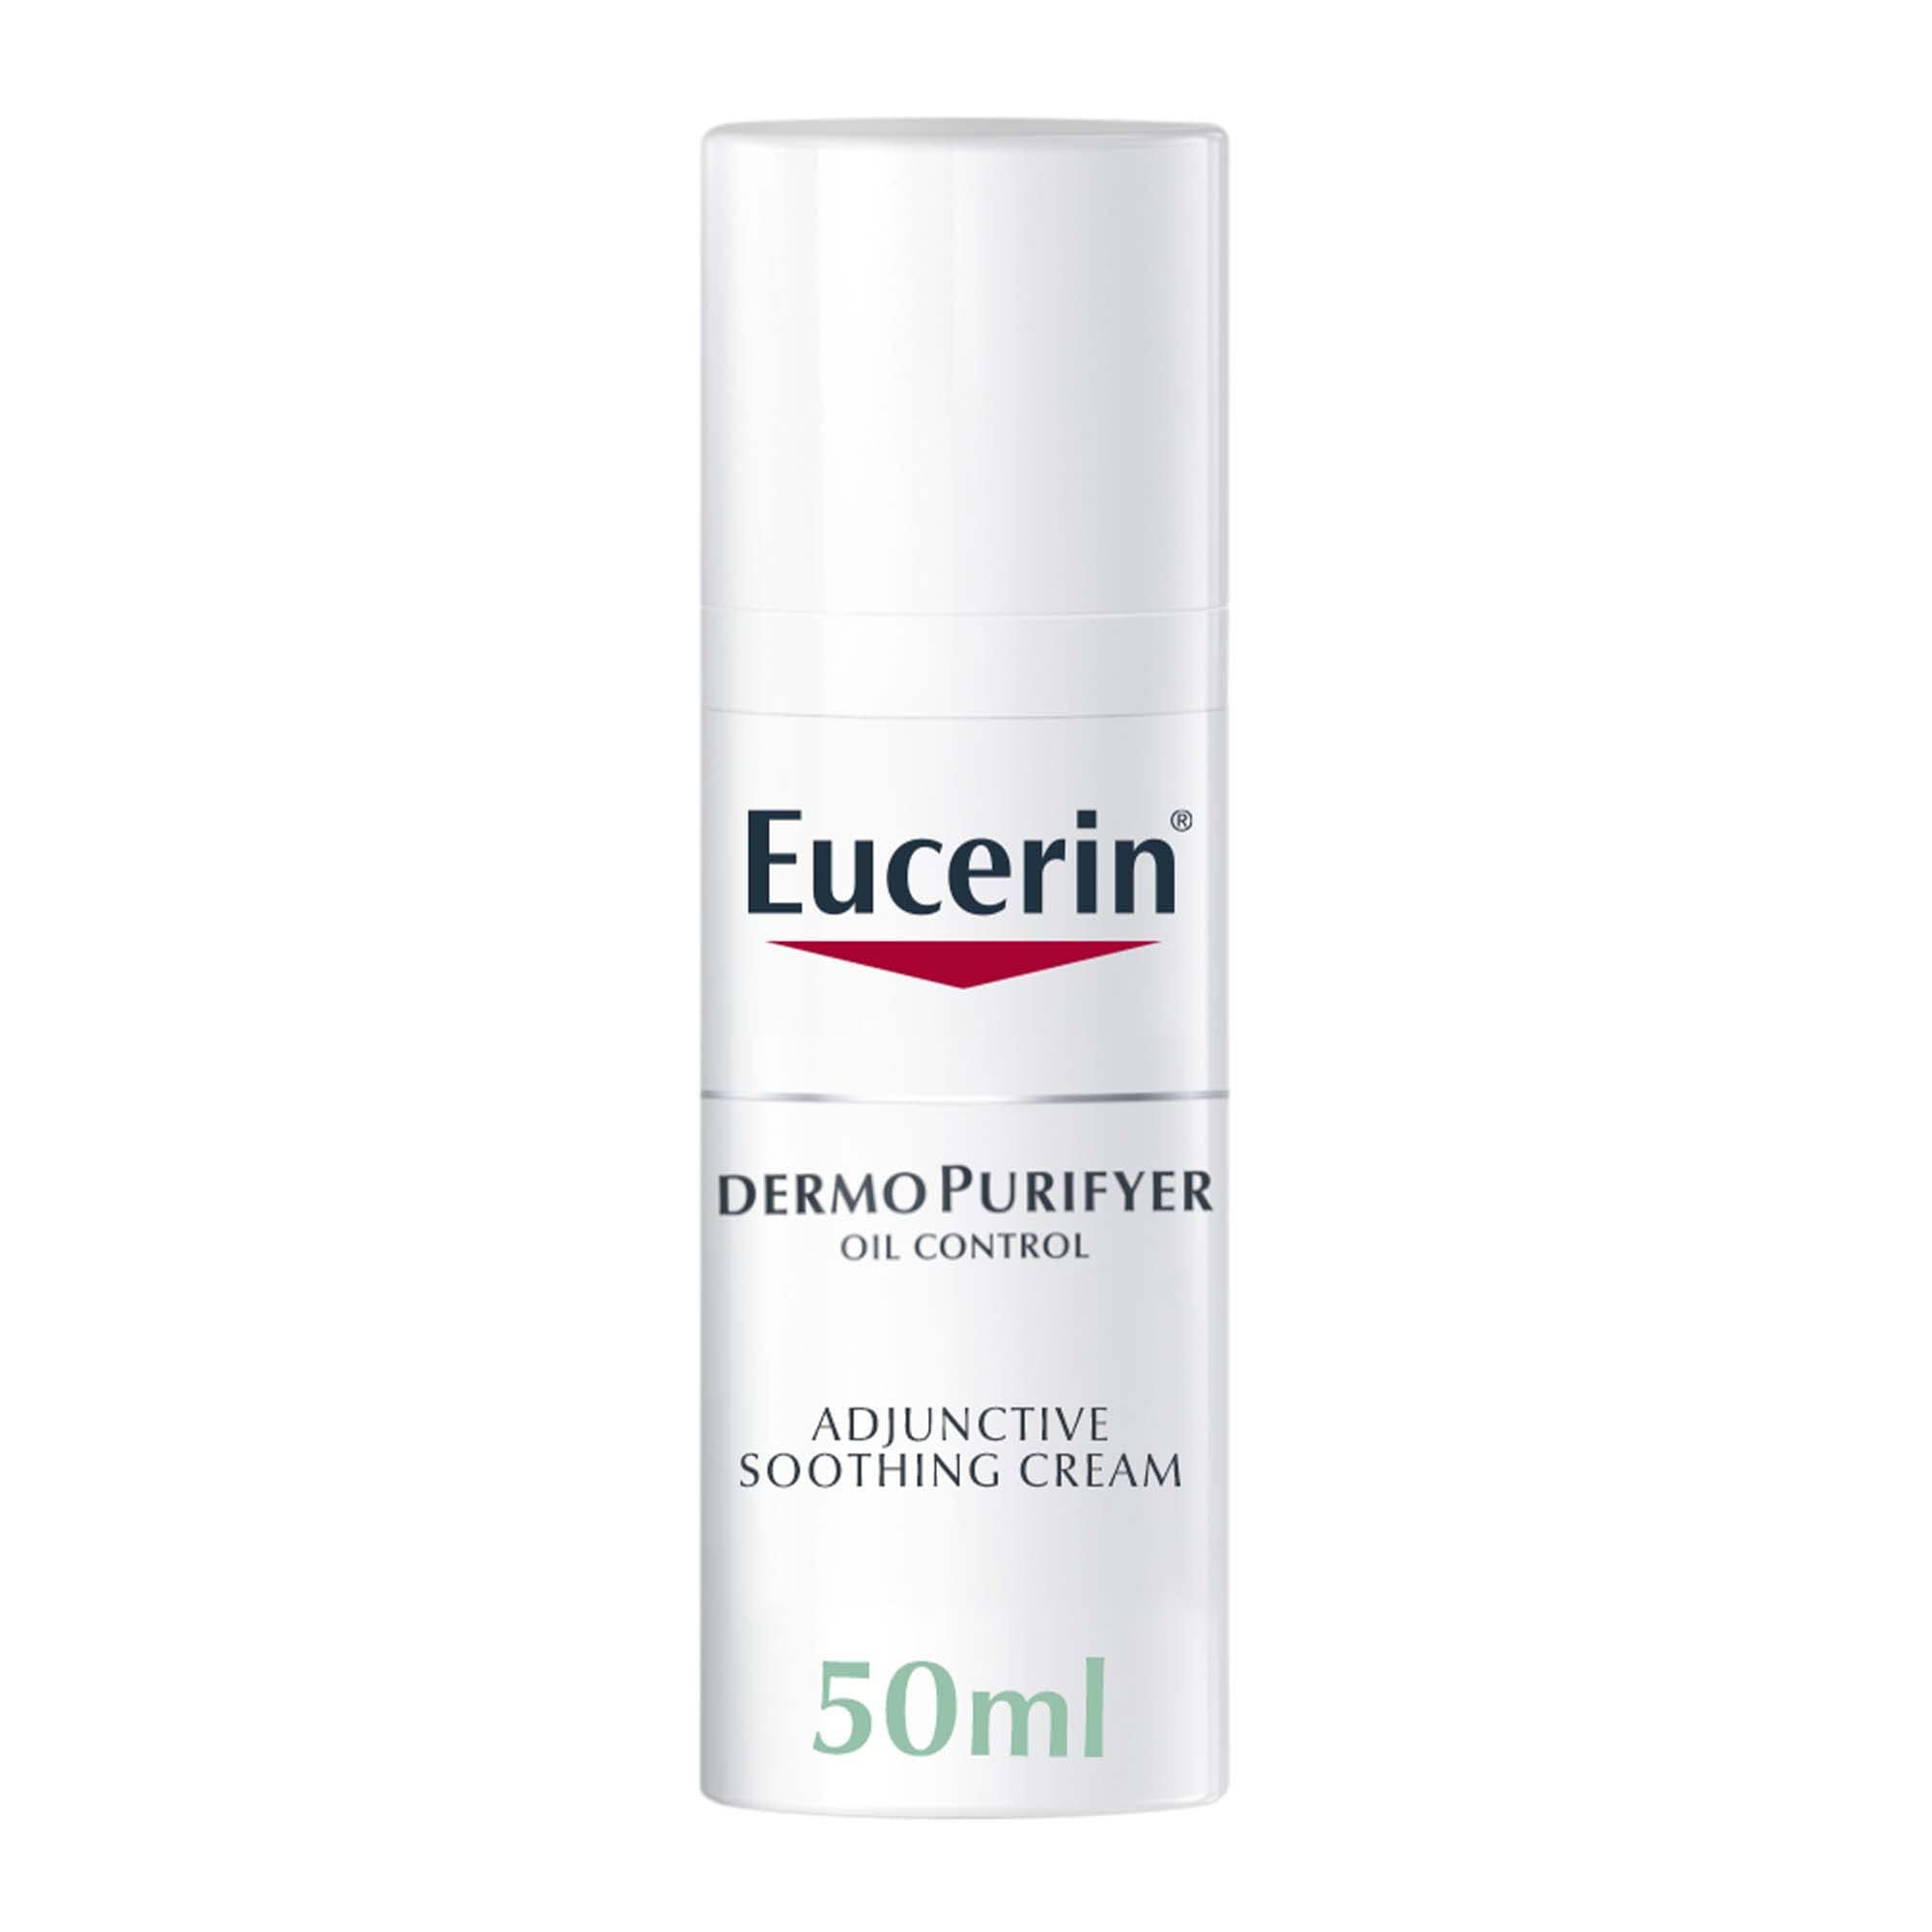 Eucerin Dermo Purifyer 50ml Adjunctive Soothing Cream Oil Control